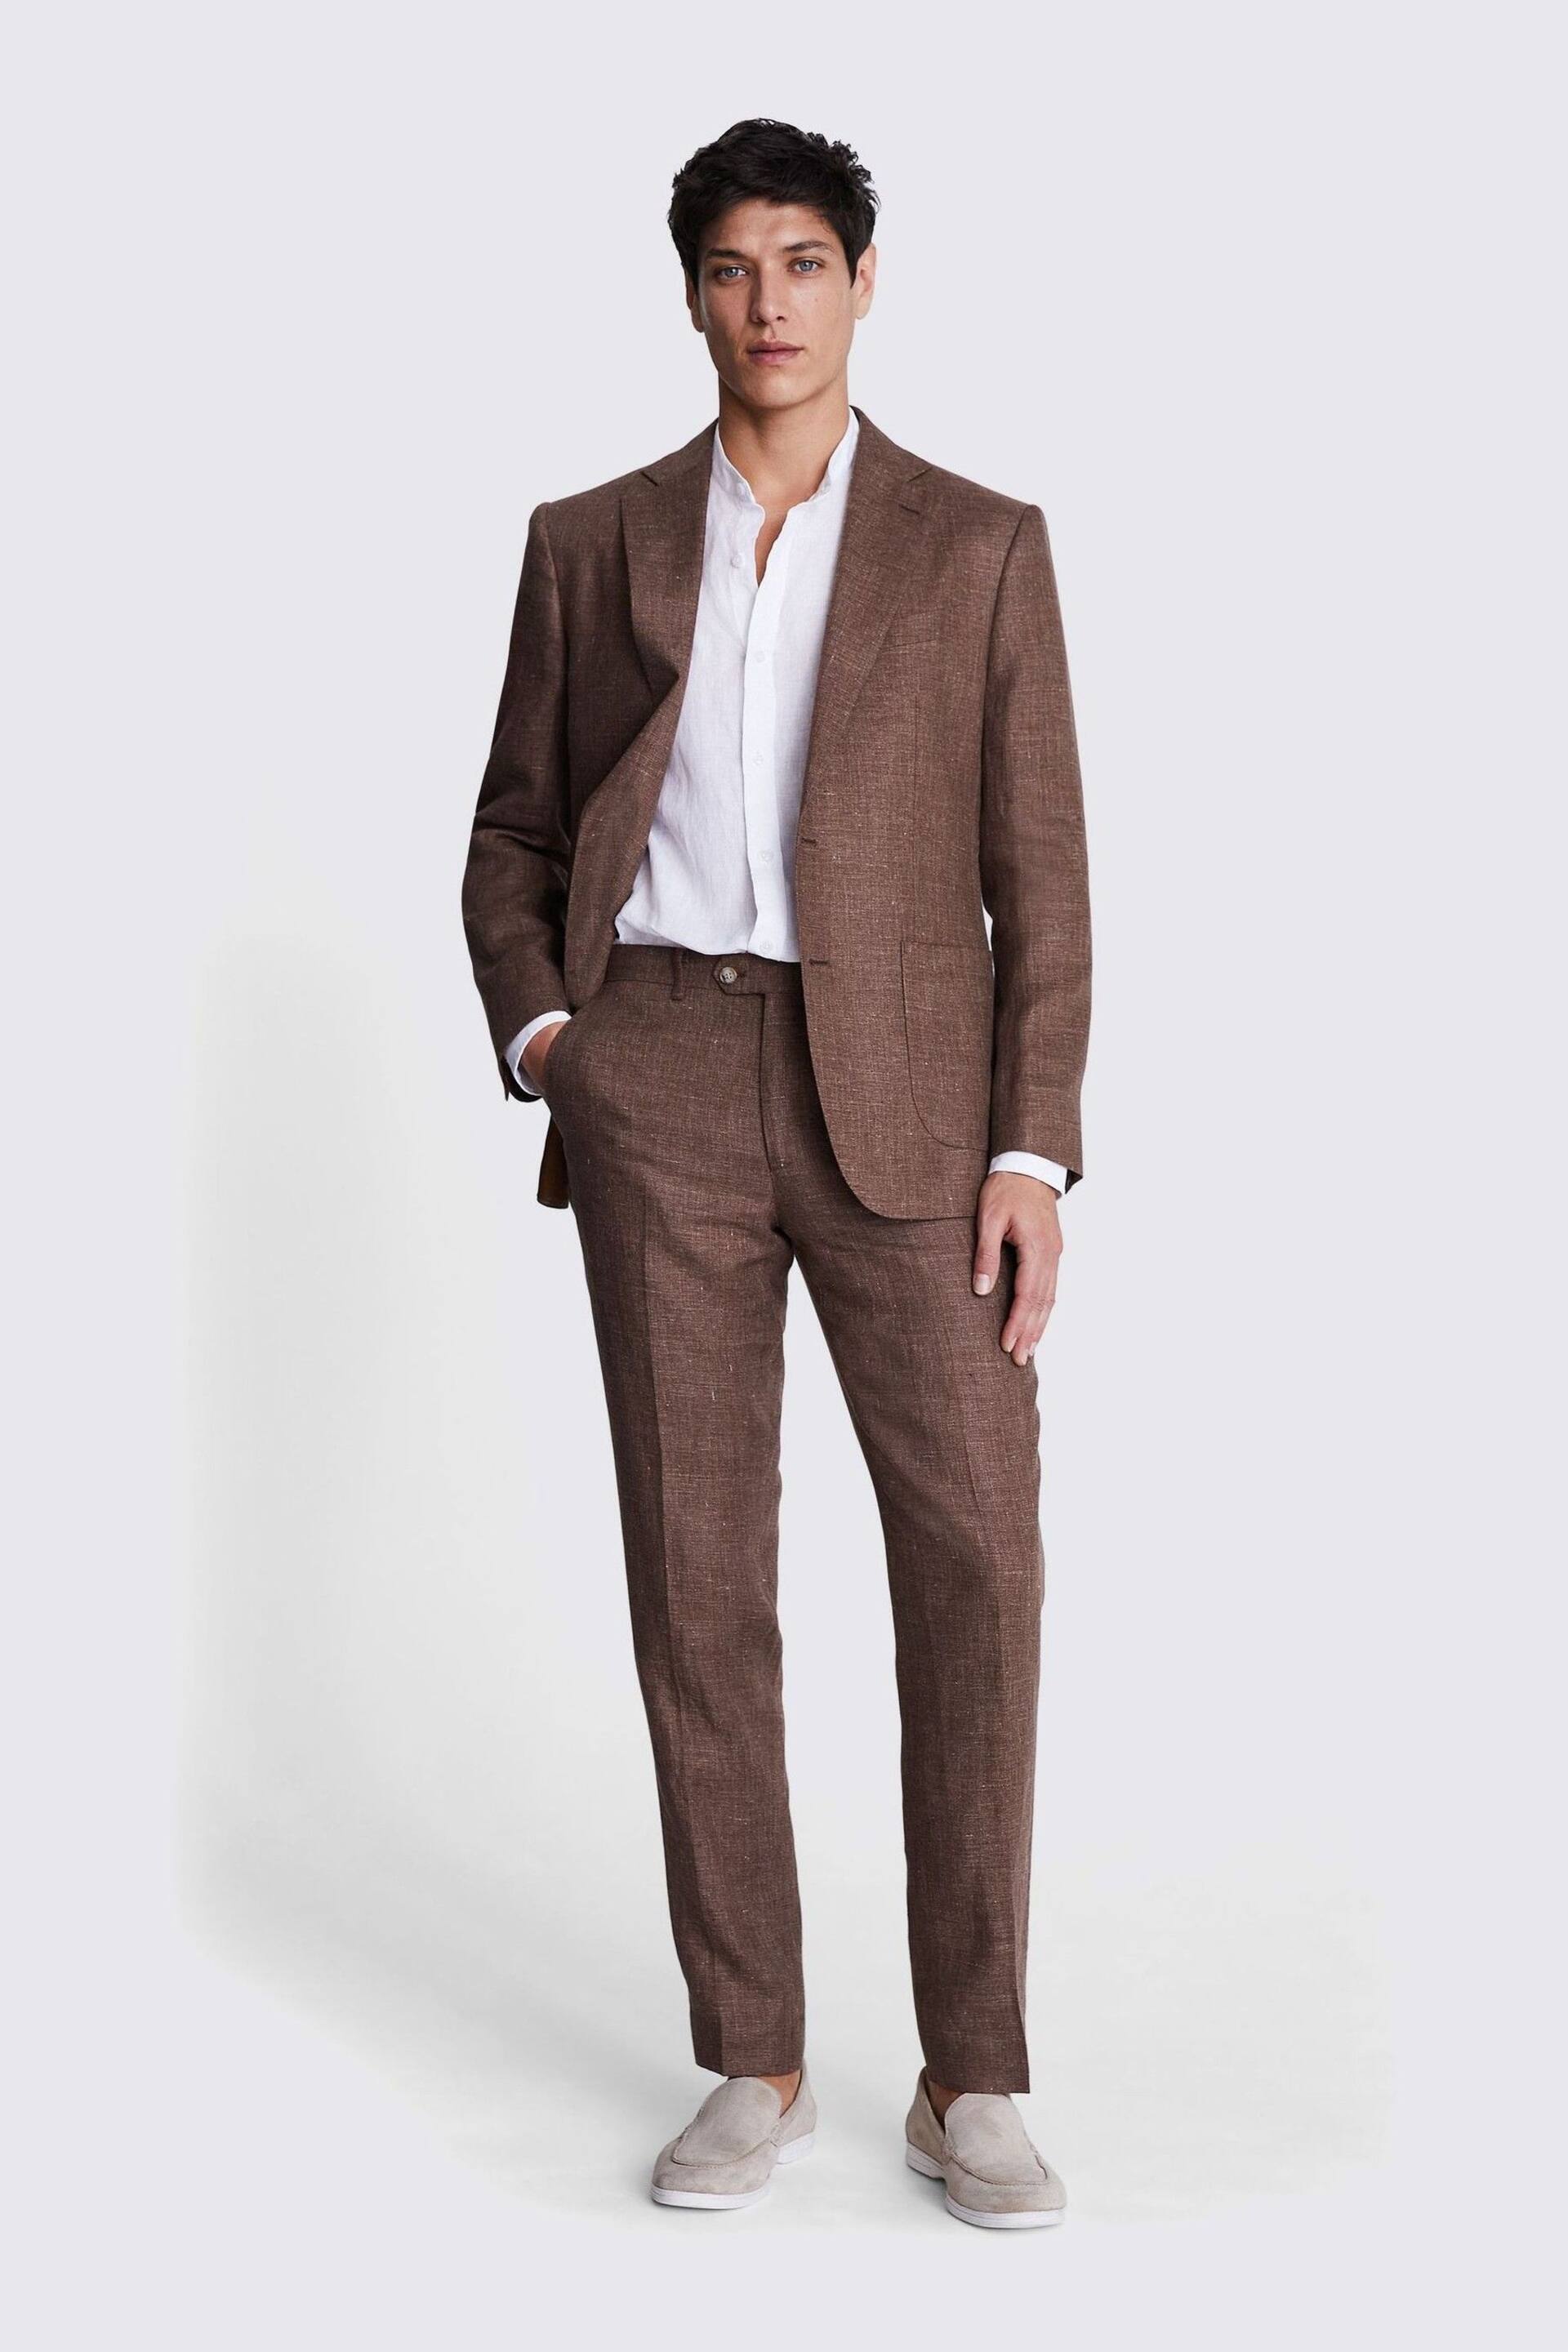 MOSS Tailored Fit Copper Linen Brown Jacket - Image 3 of 4